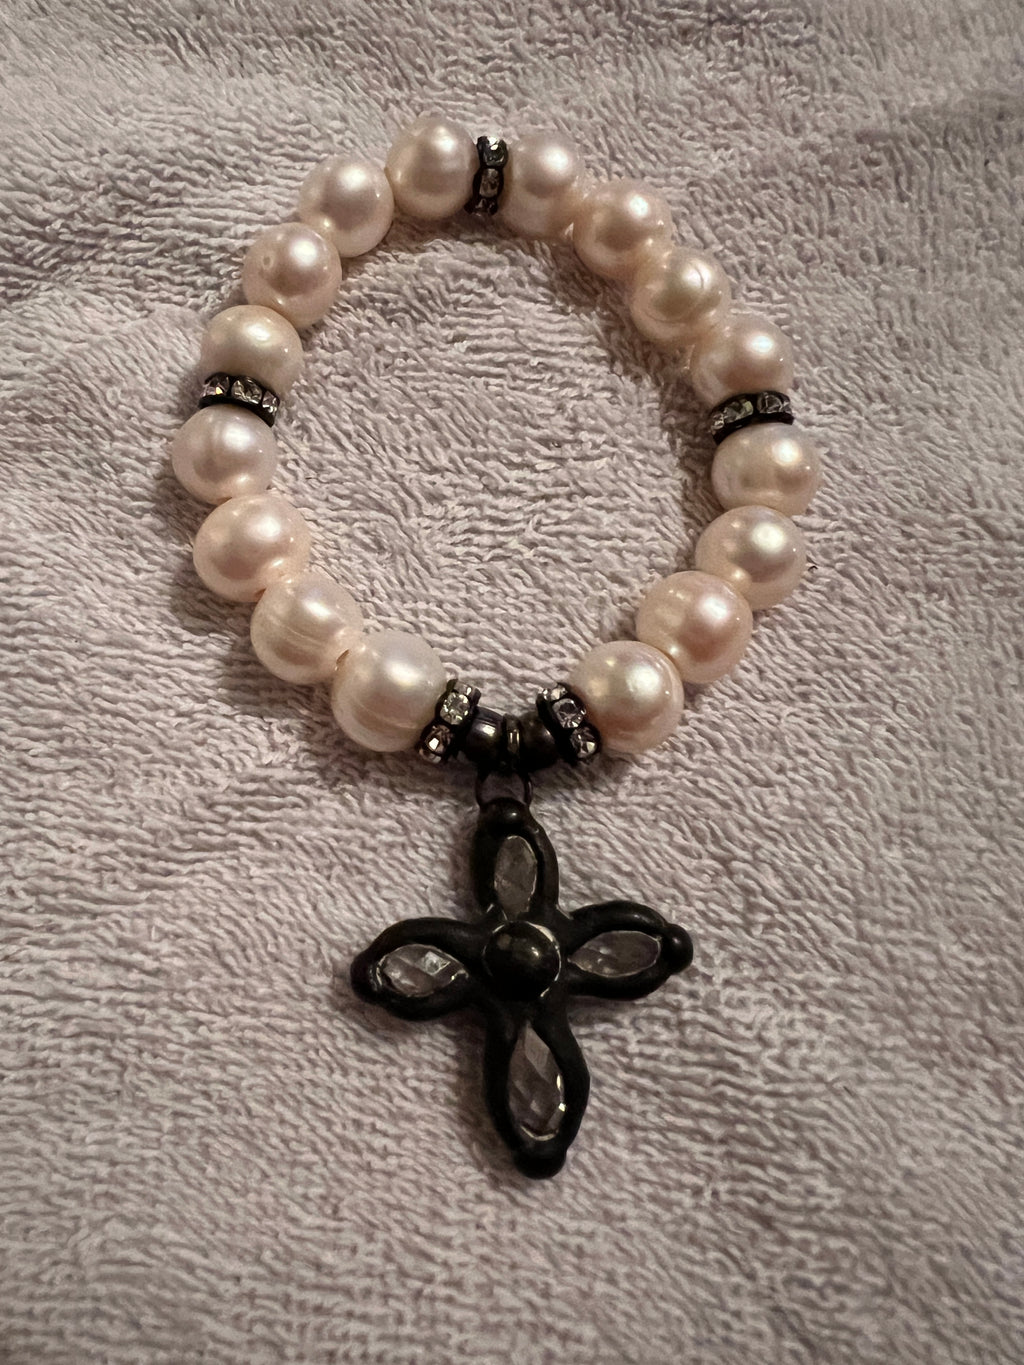 Faux Pearl Bracelet with Crystal Cross by Holifield Designs